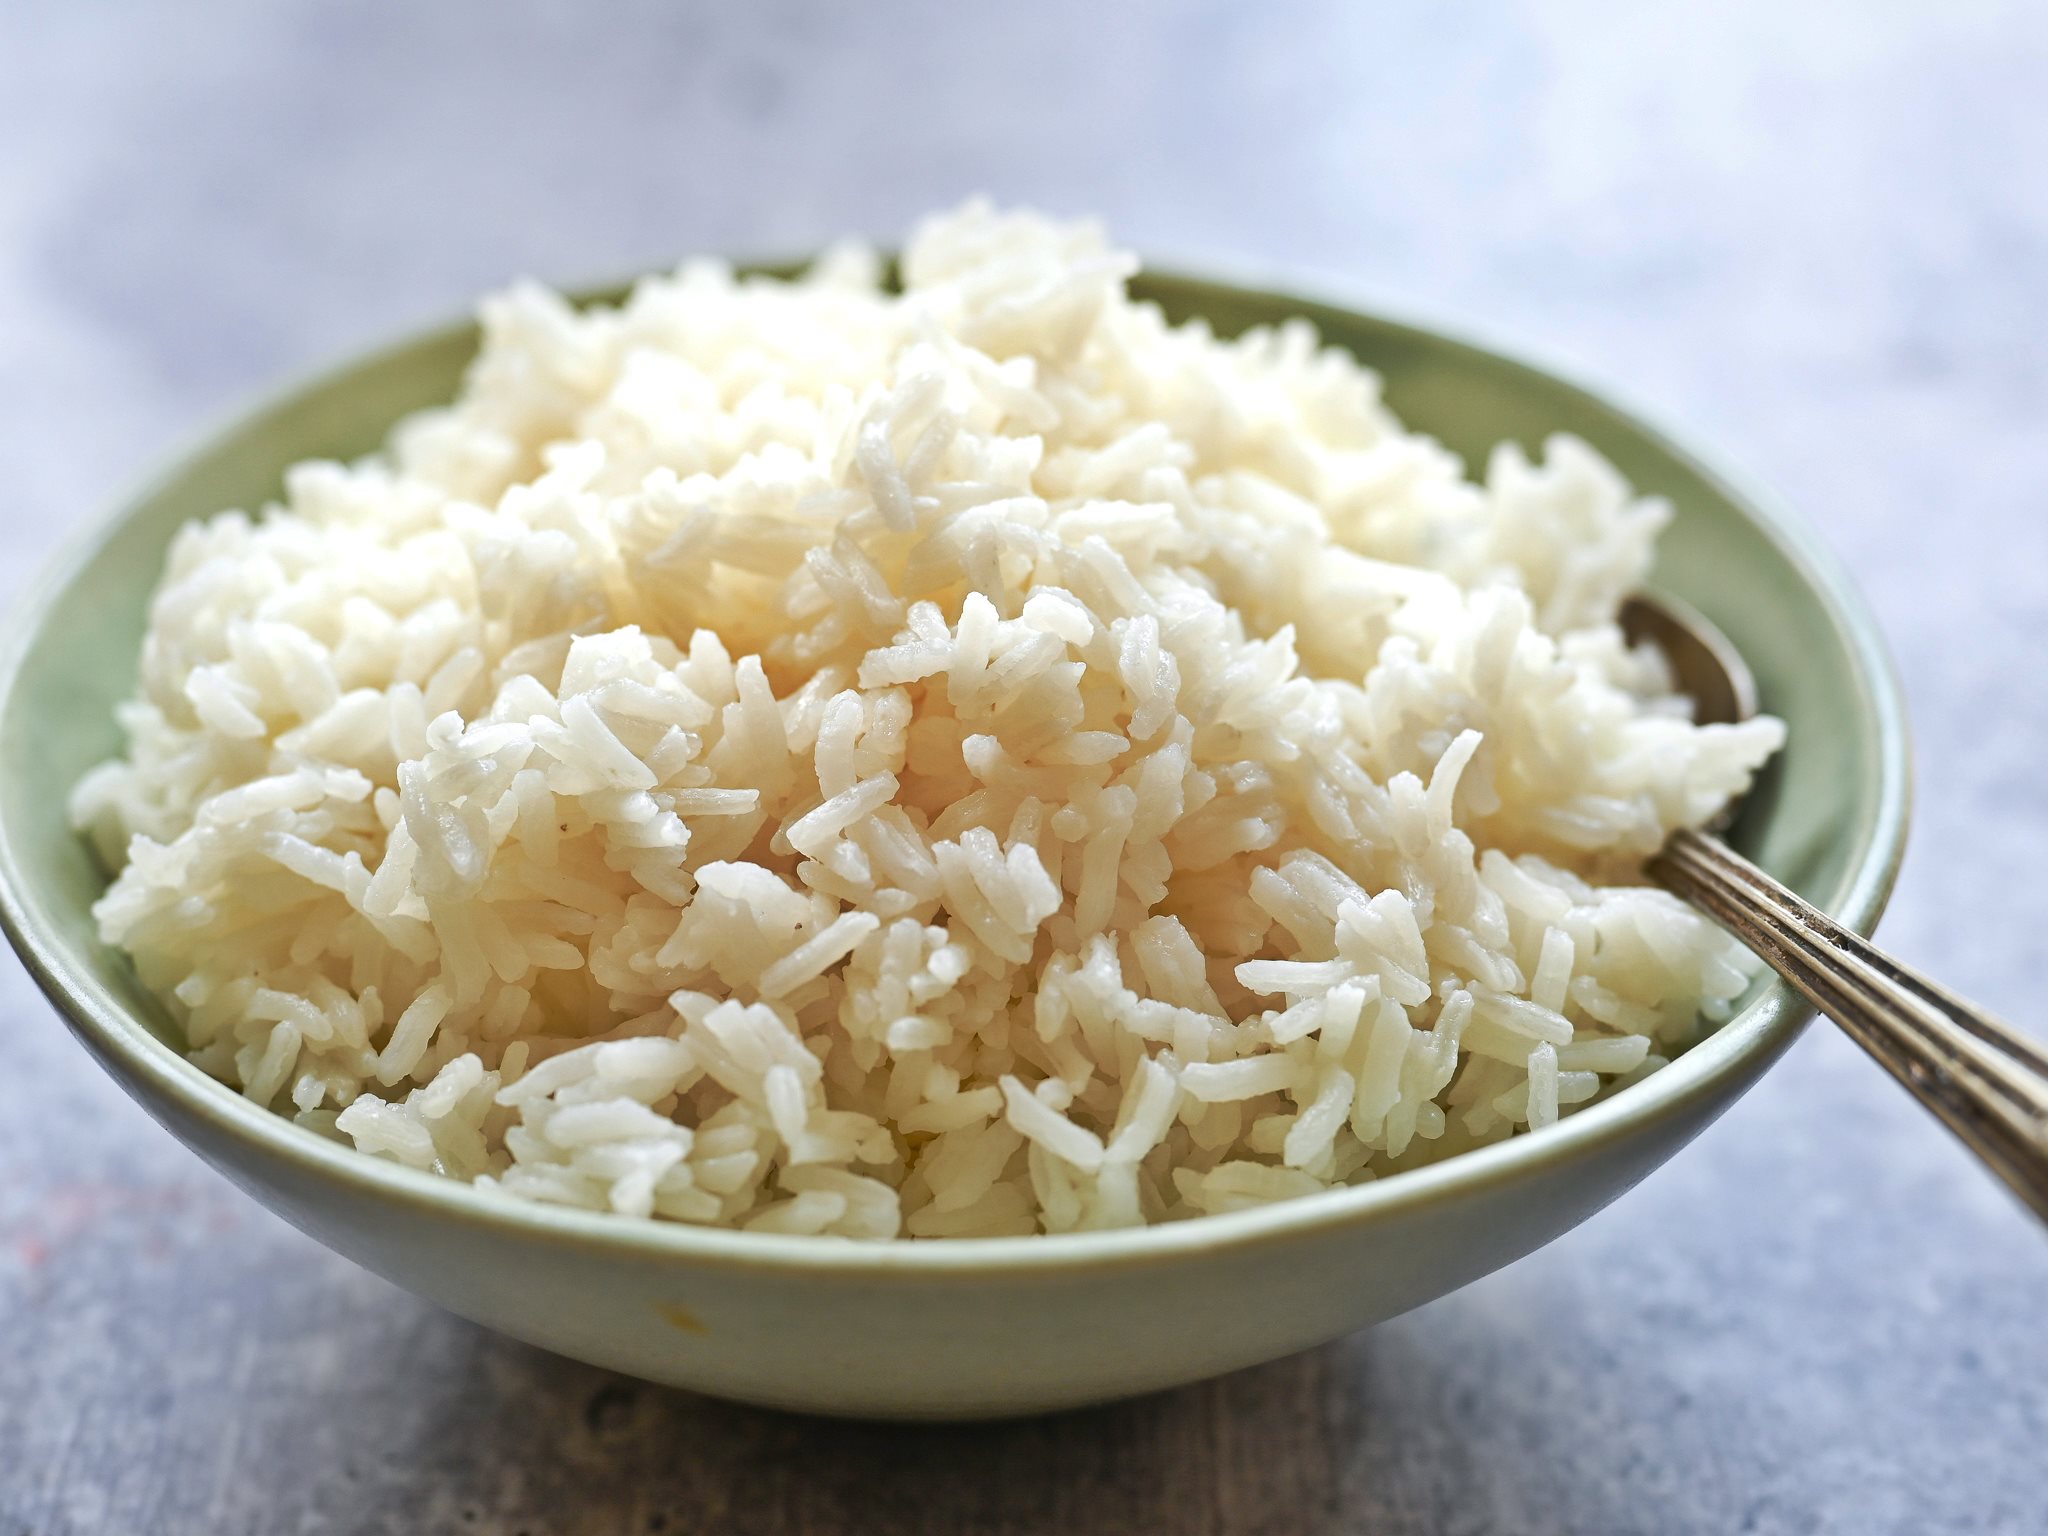 How to cook rice in your Aroma Pot Style rice cooker 